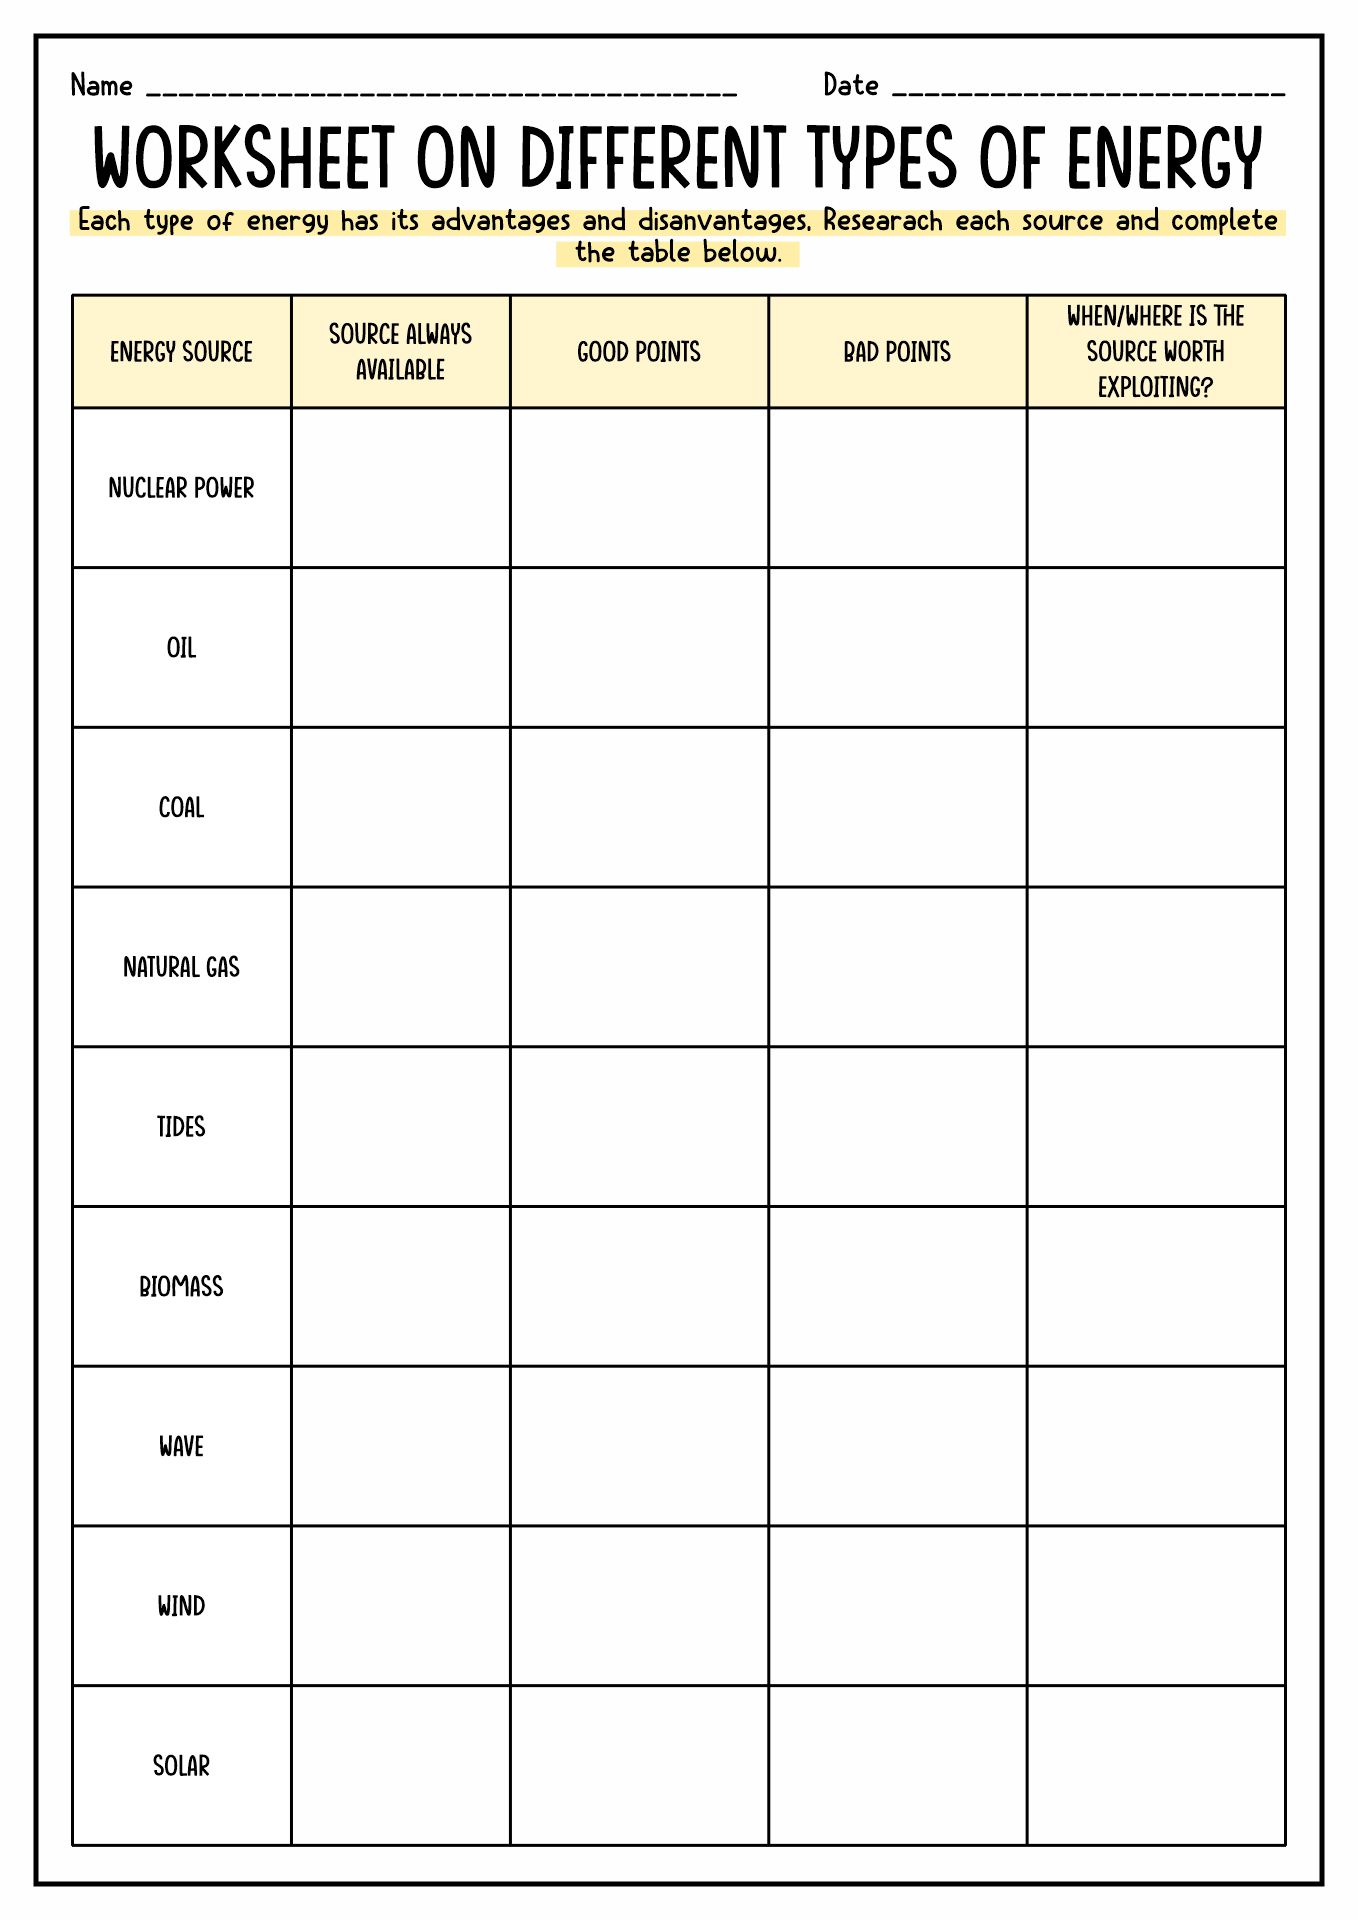 Forms of Energy Worksheet Answers Image